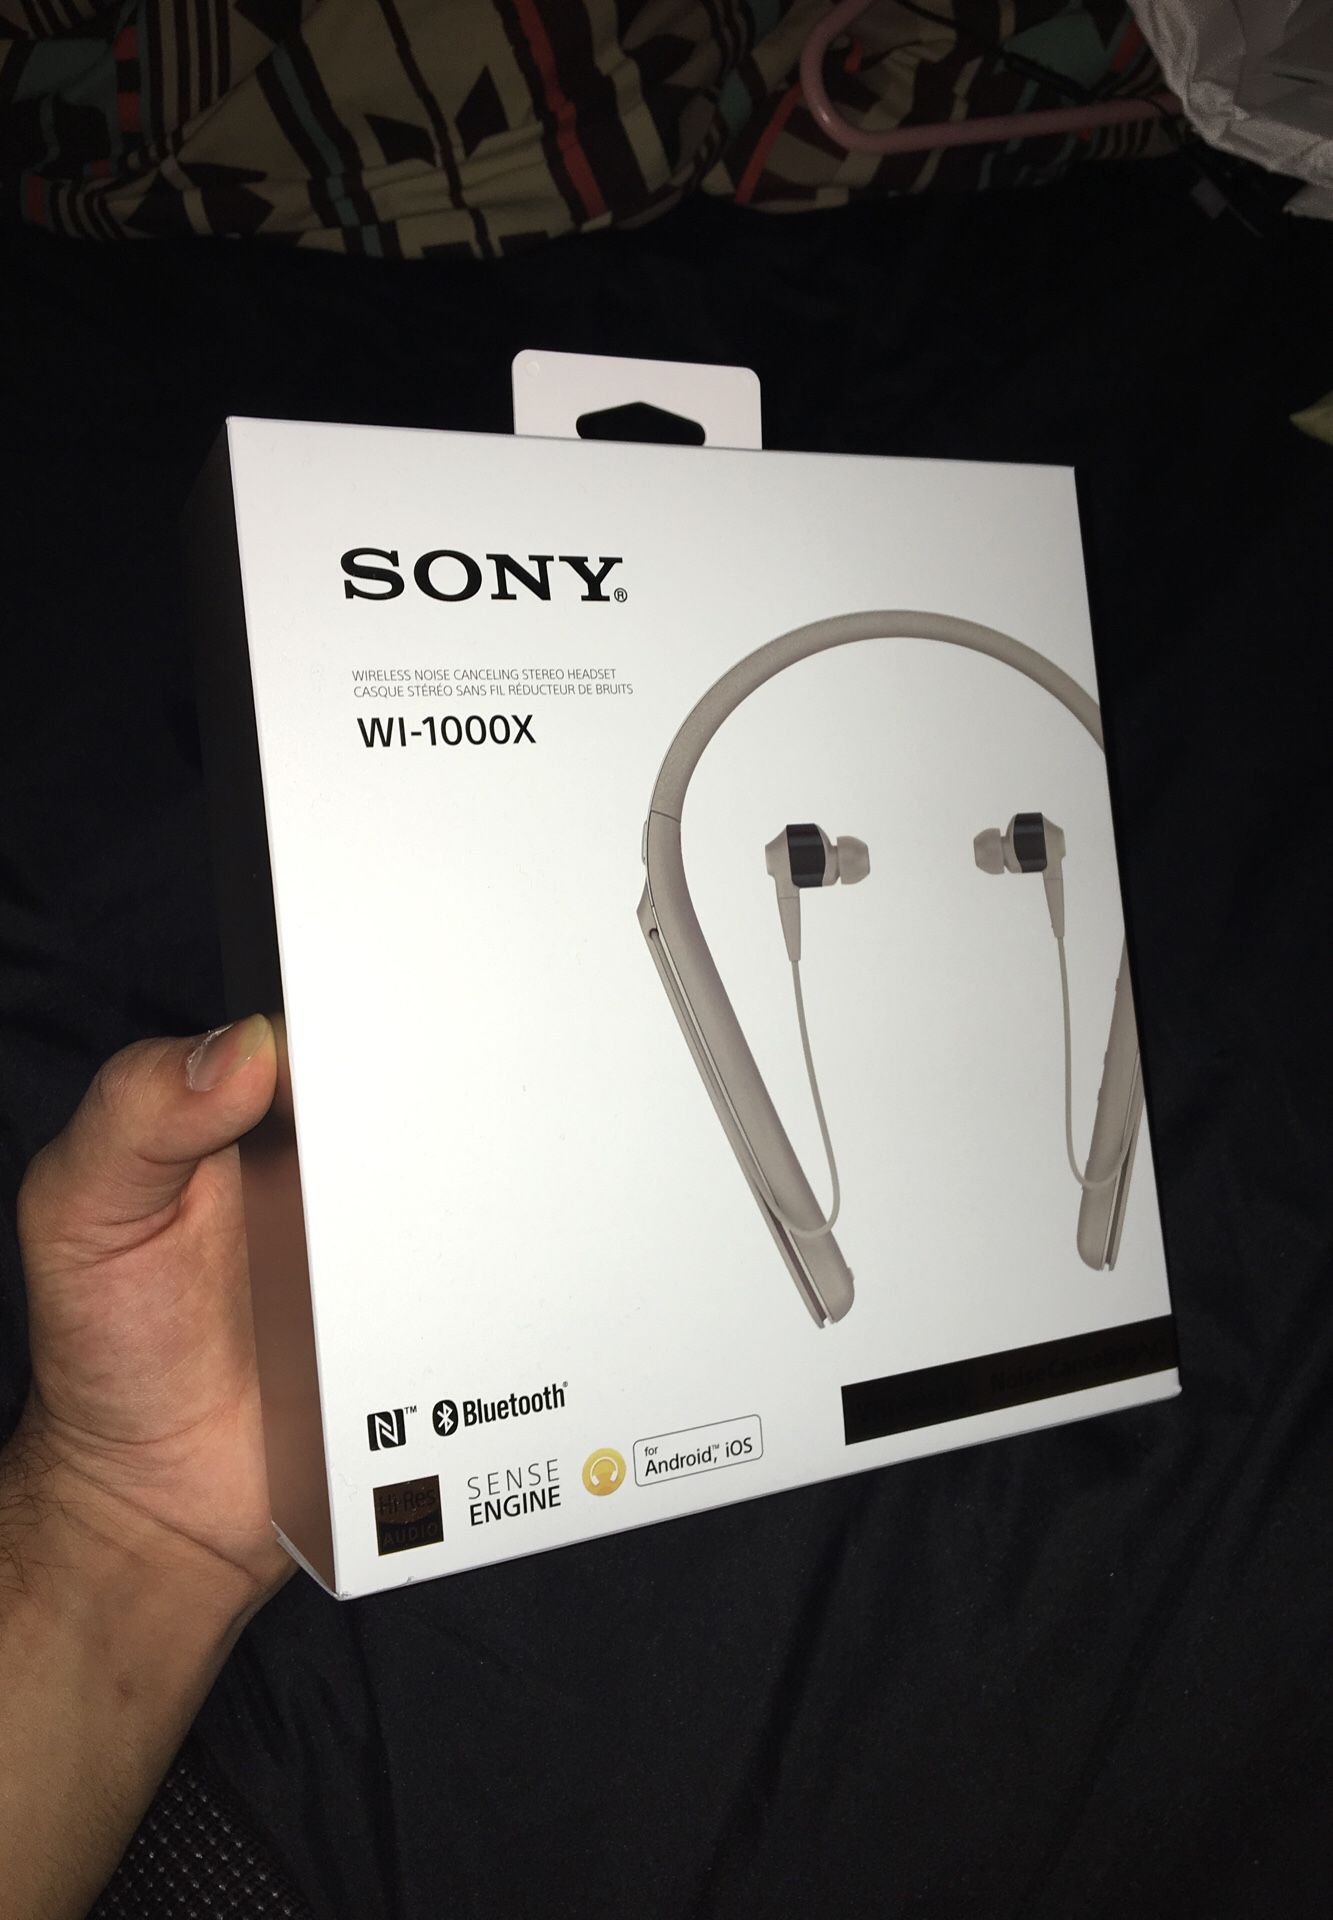 Sony WI-1000X Wireless Noise Cancelling Stereo Headset